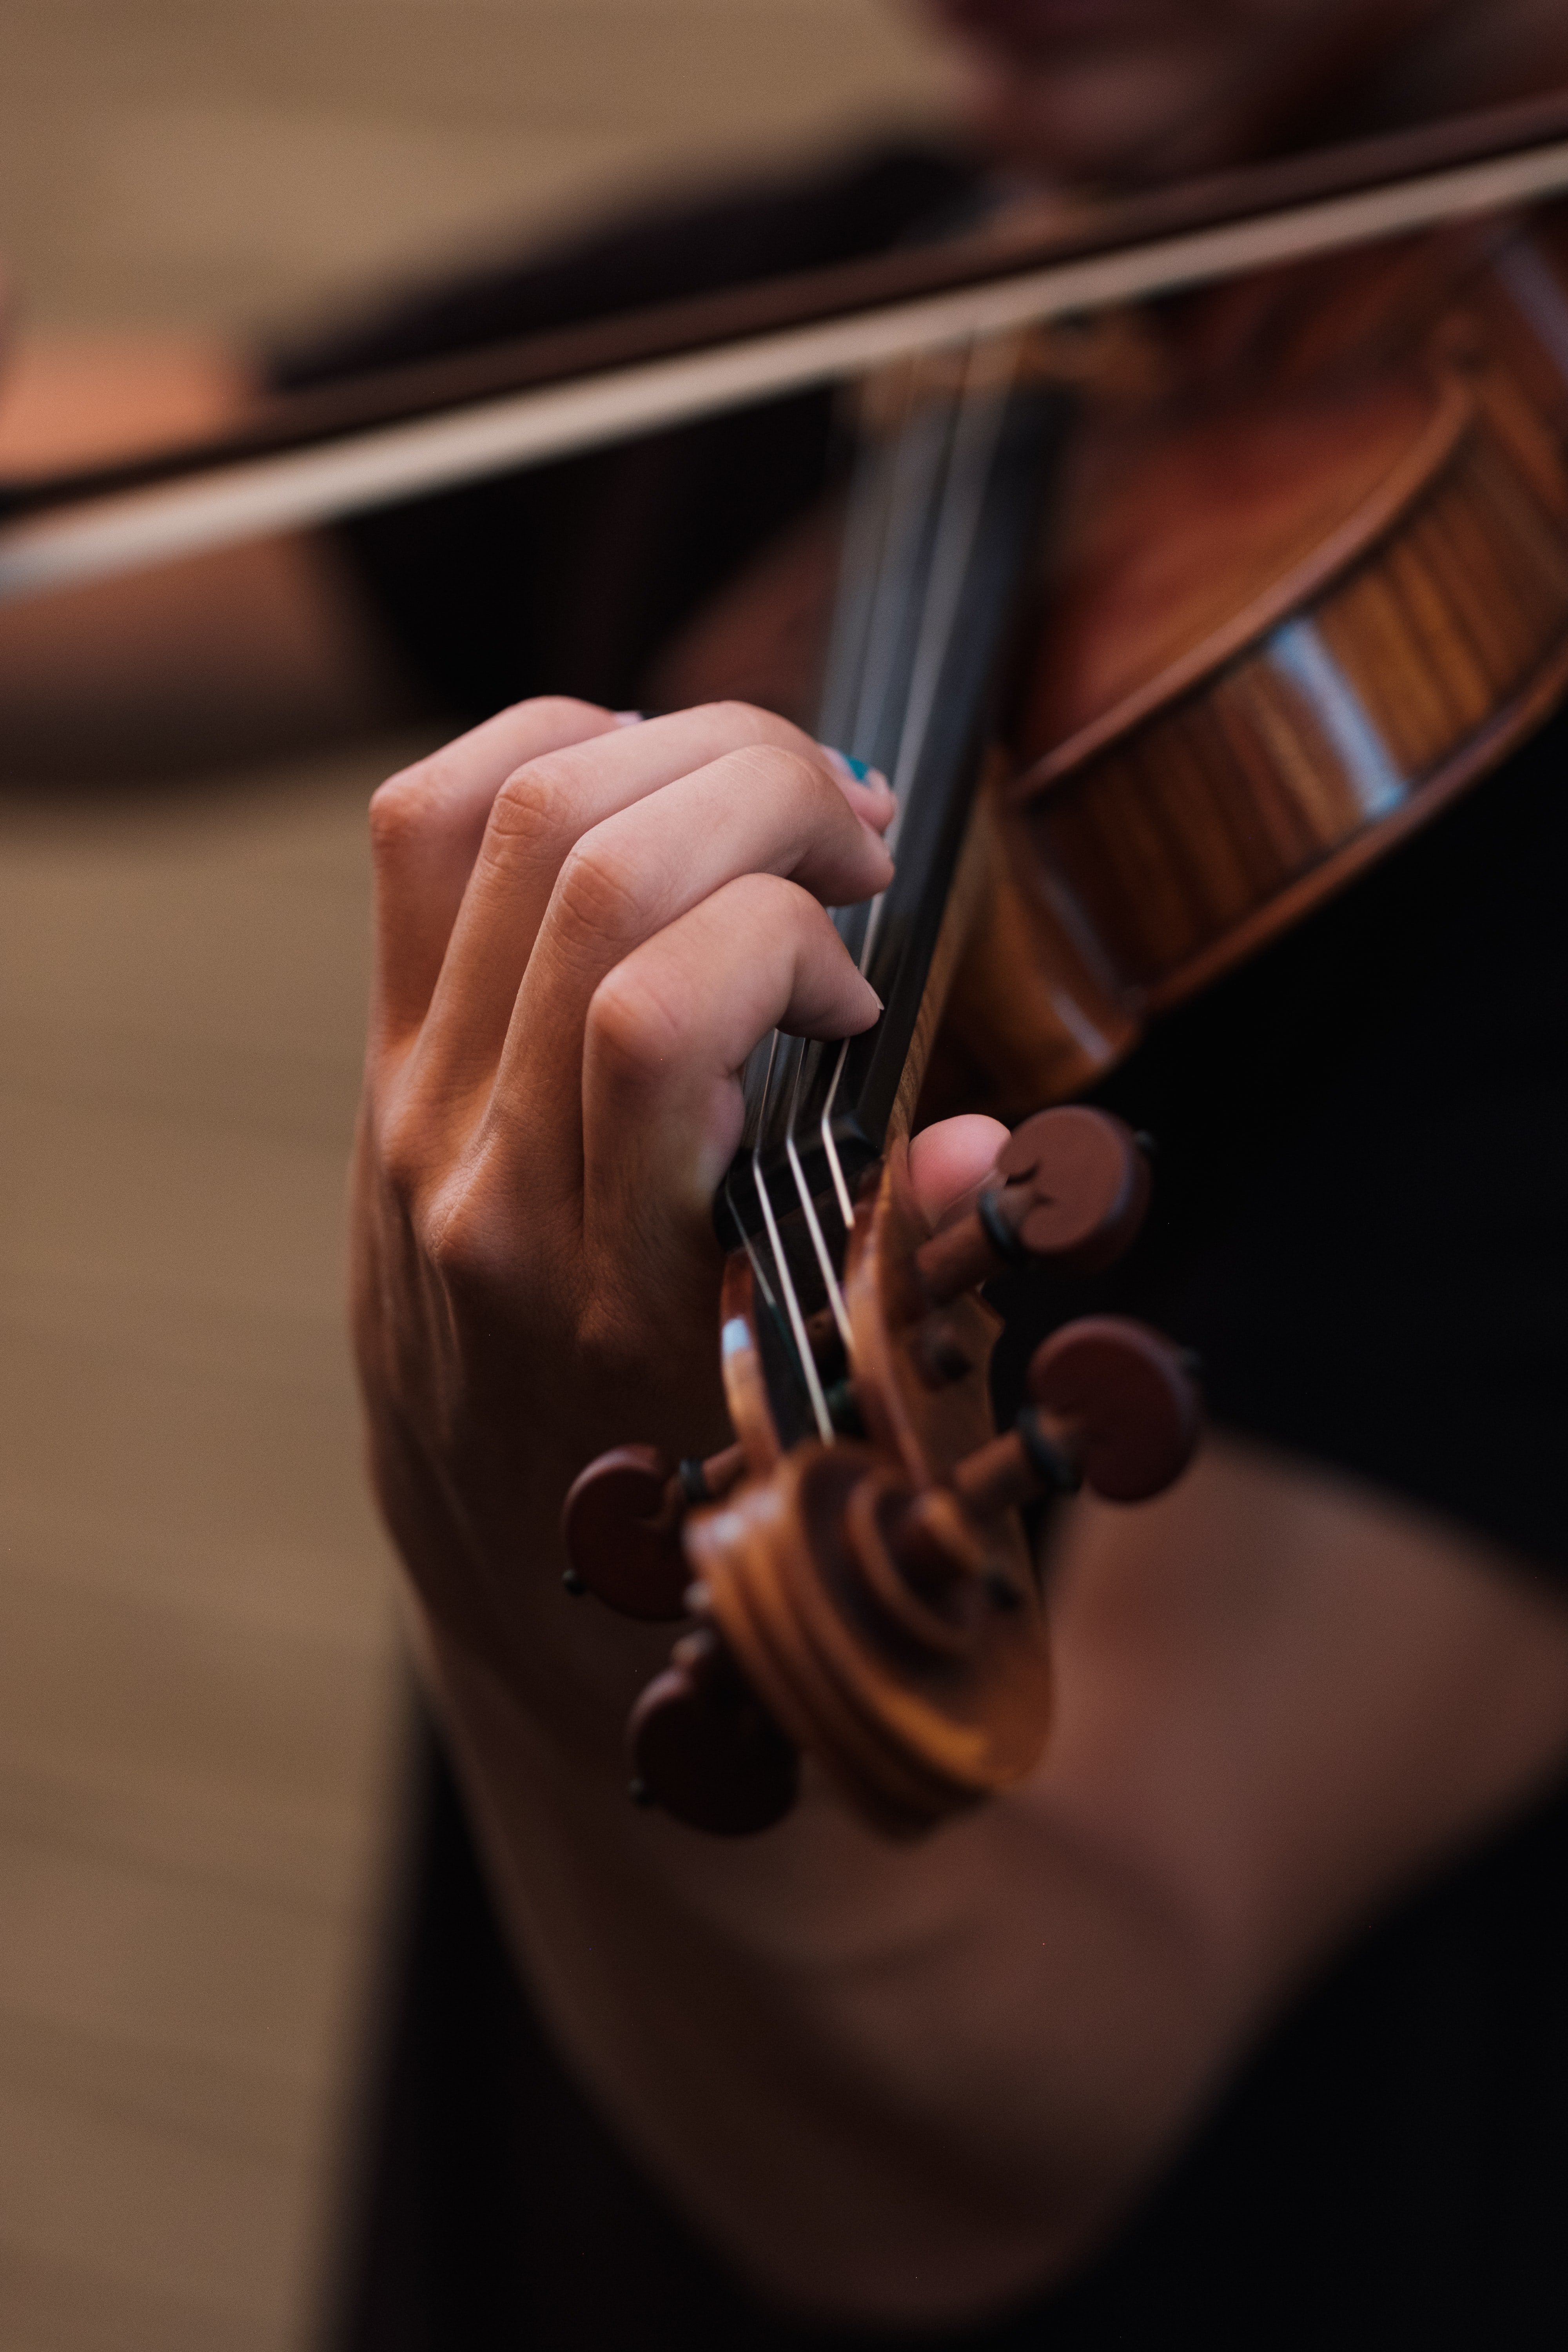 The violin player tripped over Paul. | Source: Unsplash